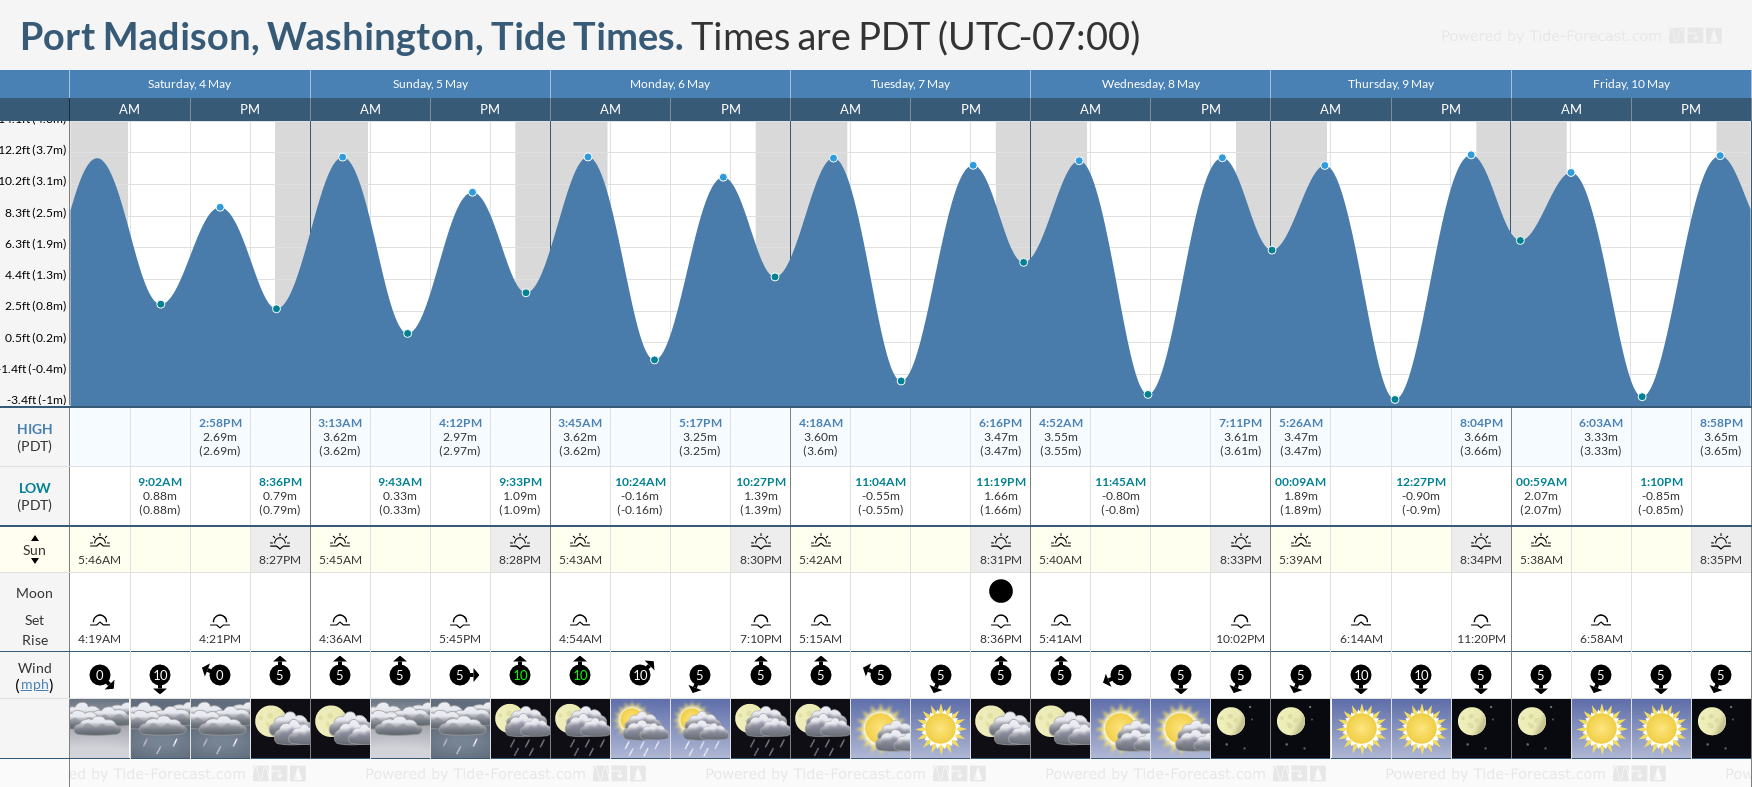 Port Madison, Washington Tide Chart including high and low tide tide times for the next 7 days